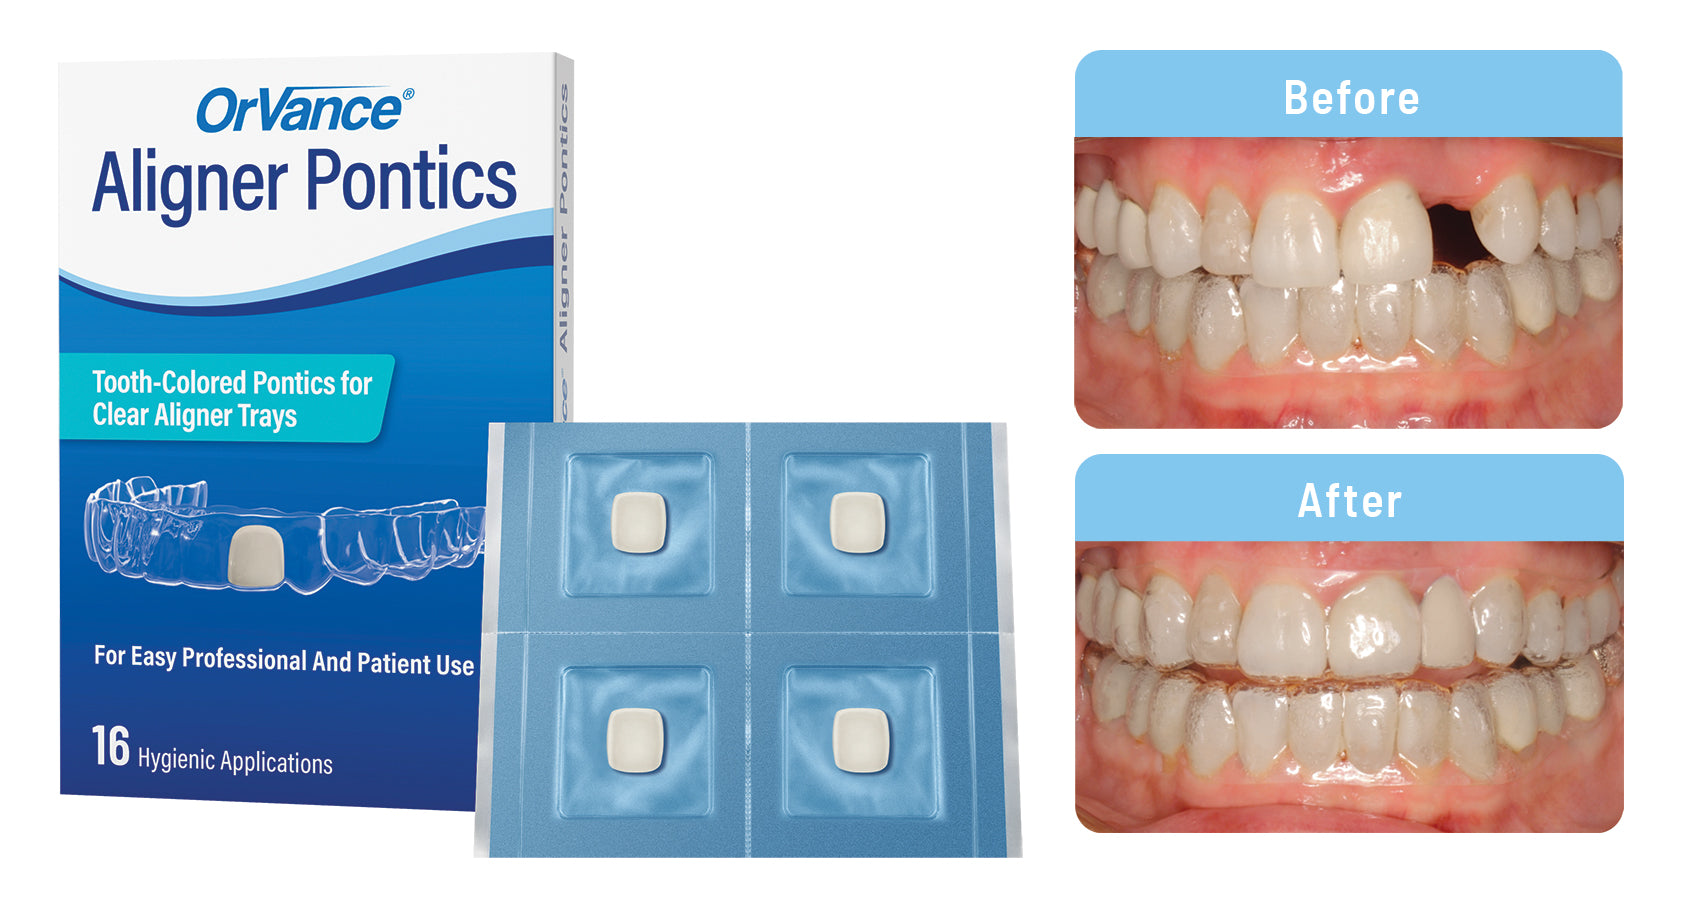 OrVance Aligner Pontics Preferred by Practices According to New Whitepaper